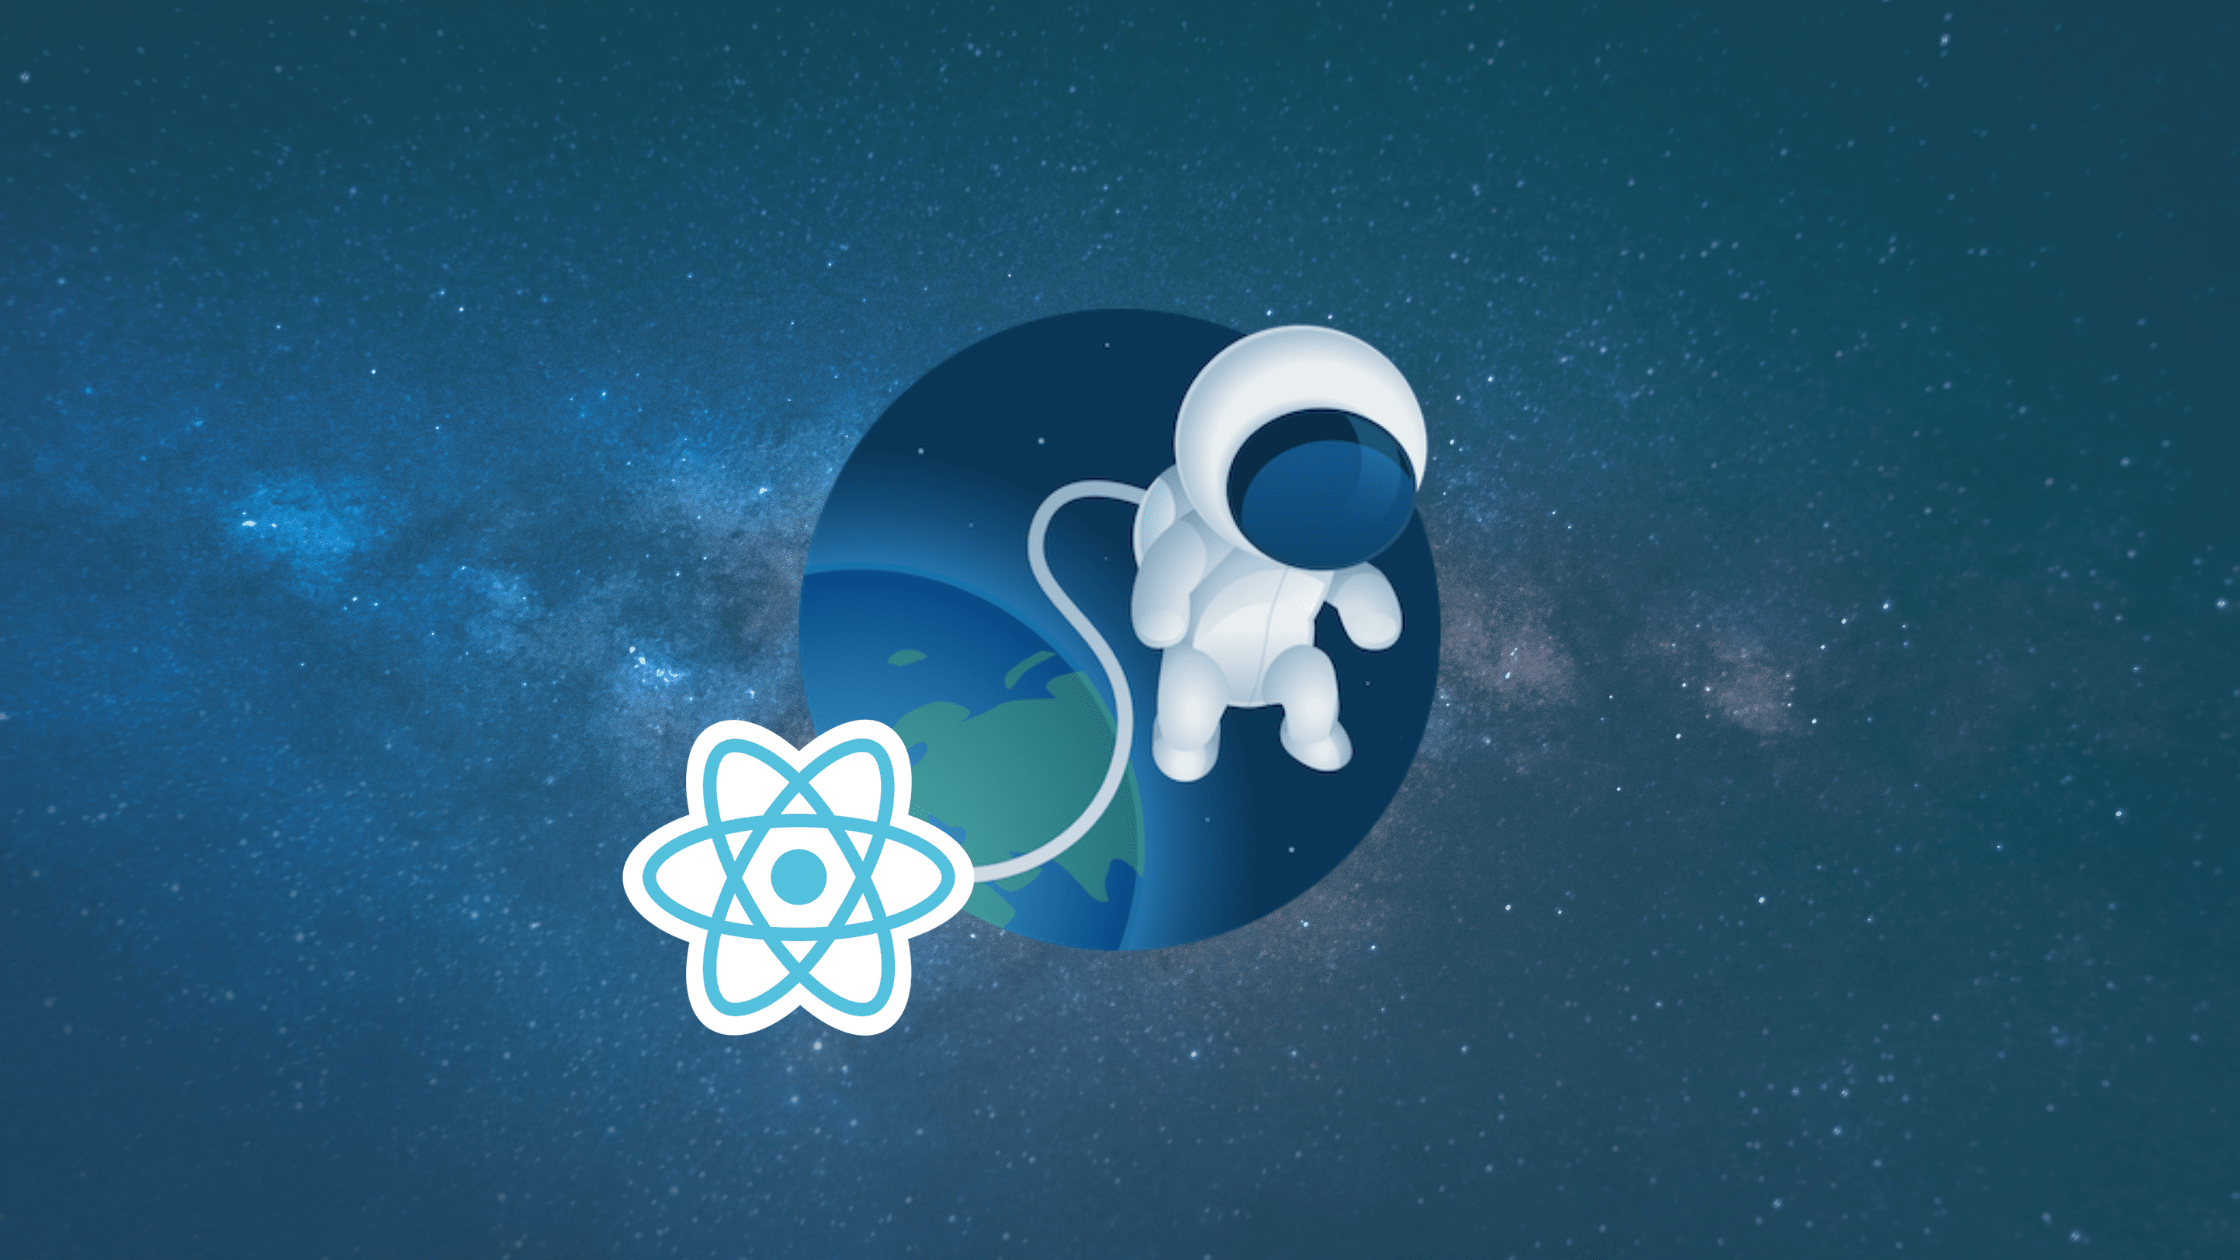 Getting Started with React Cosmos